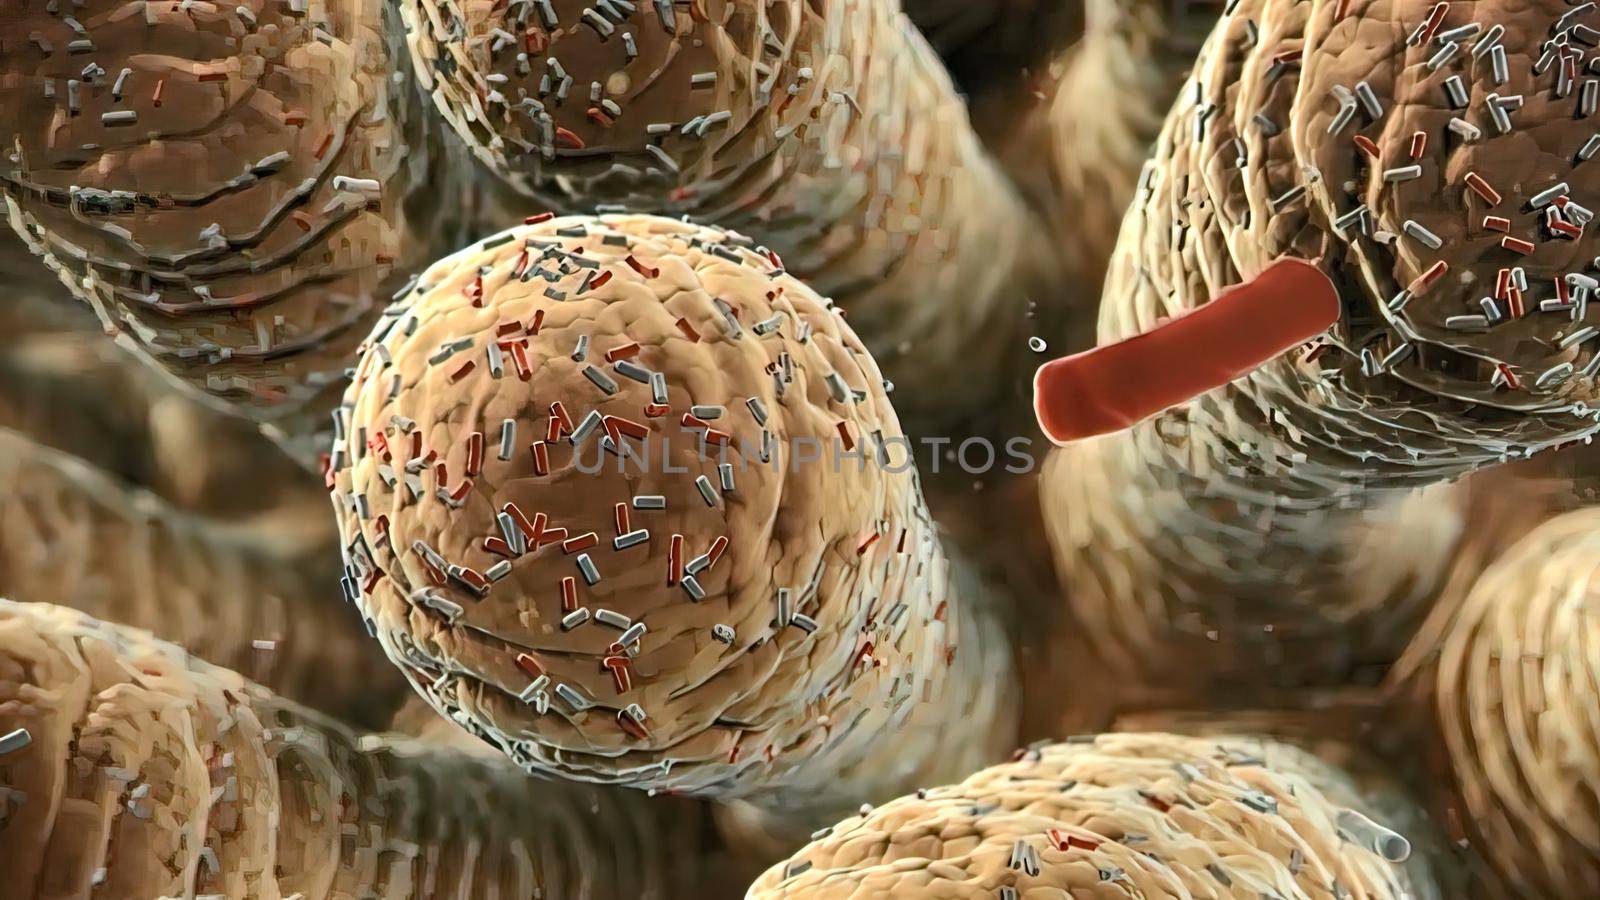 Bacteria of different shapes, rod-shaped bacteria and cocci, human microbiome, human pathogenic bacteria, 3D illustration